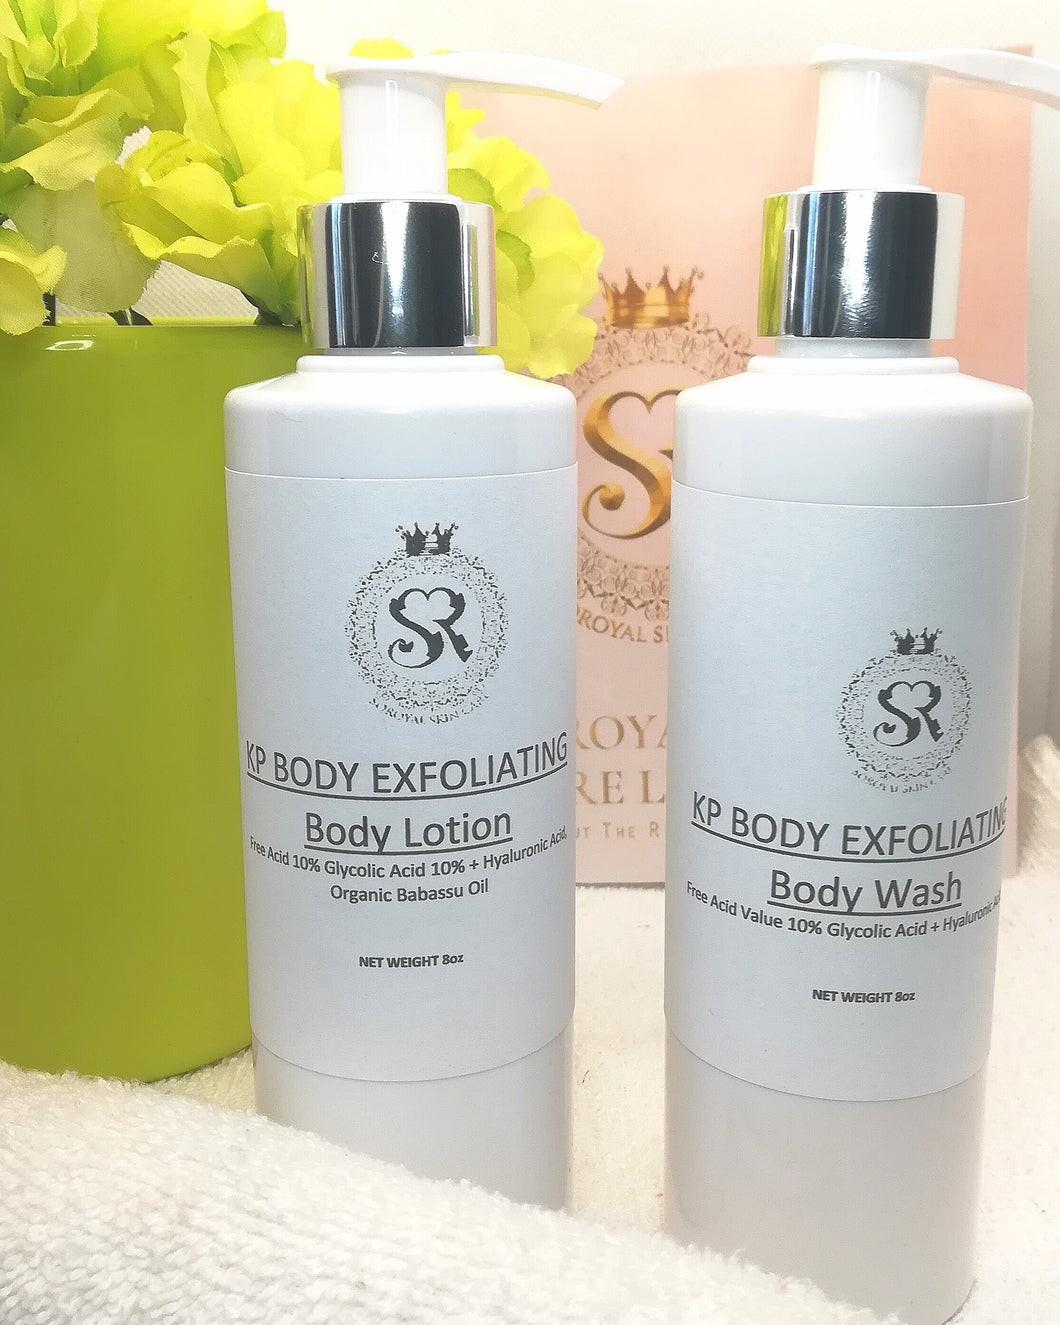 KP Exfoliating Kit - Body Wash and Body Lotion | 8oz each